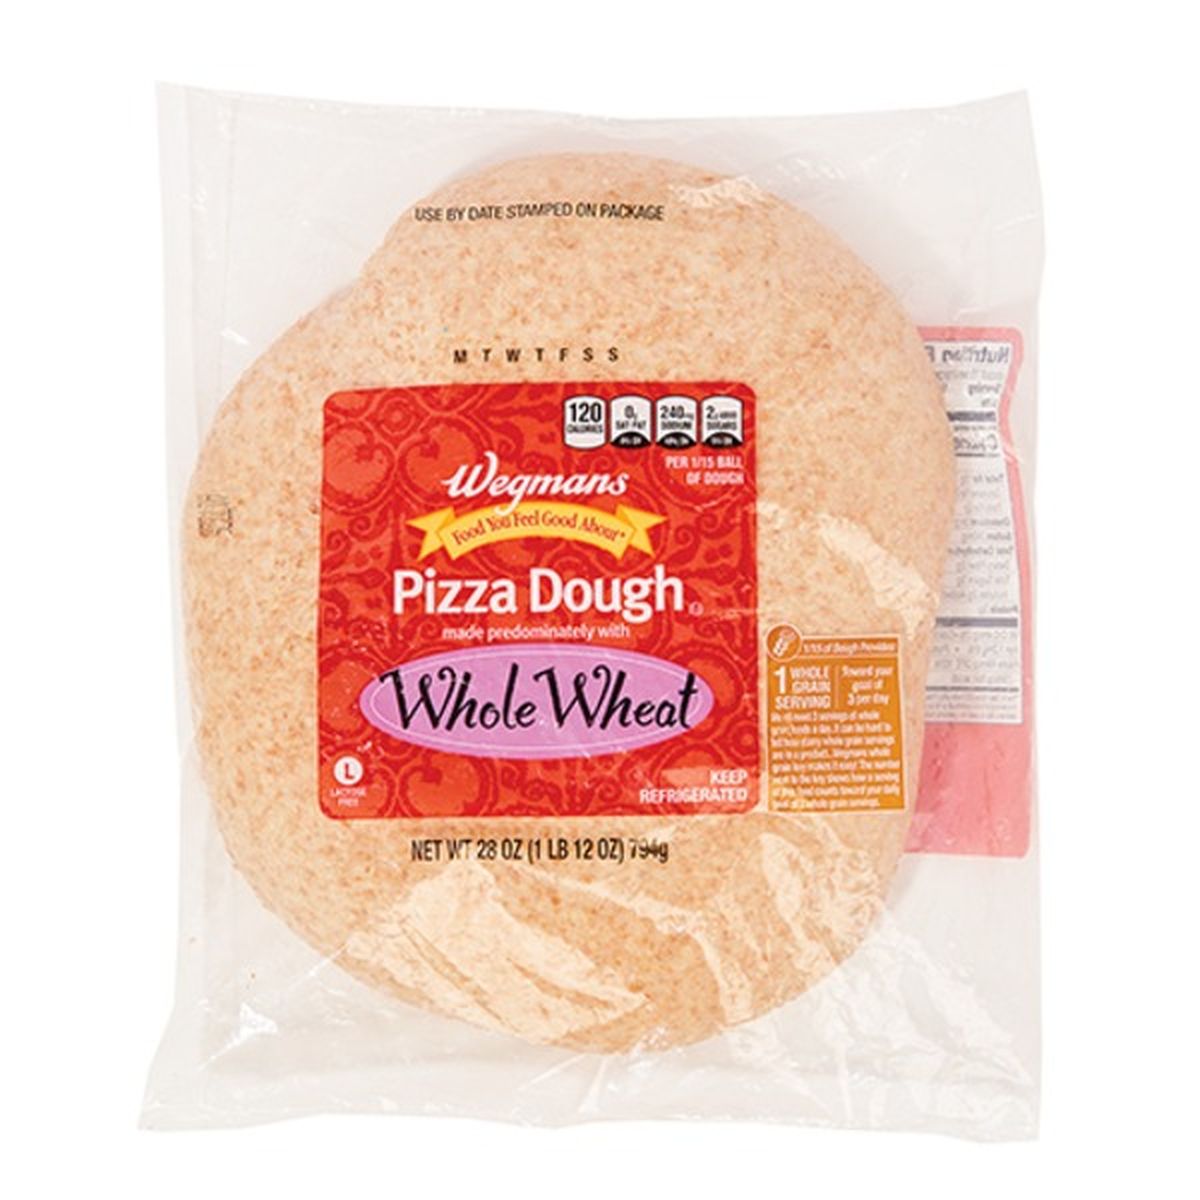 Calories in Wegmans Pizza Dough made predominately with Whole Wheat